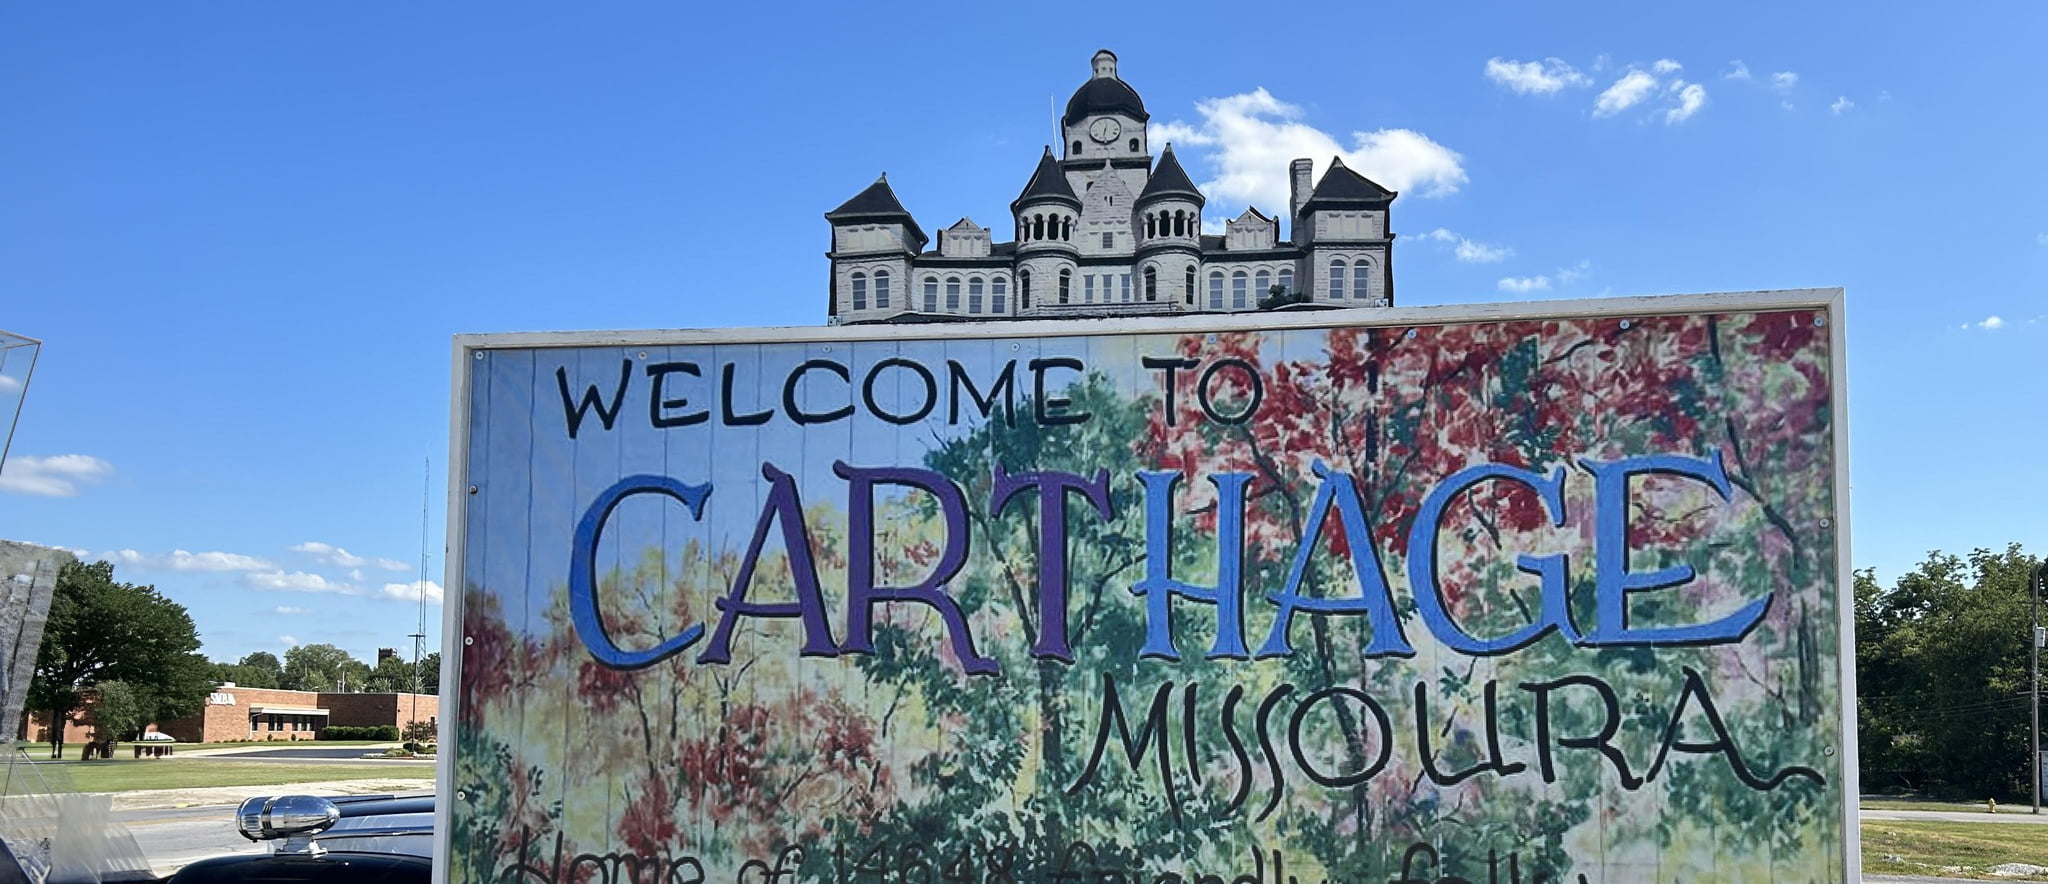 Welcome to Carthage Missoura sign with the Jasper County courthouse in the background.